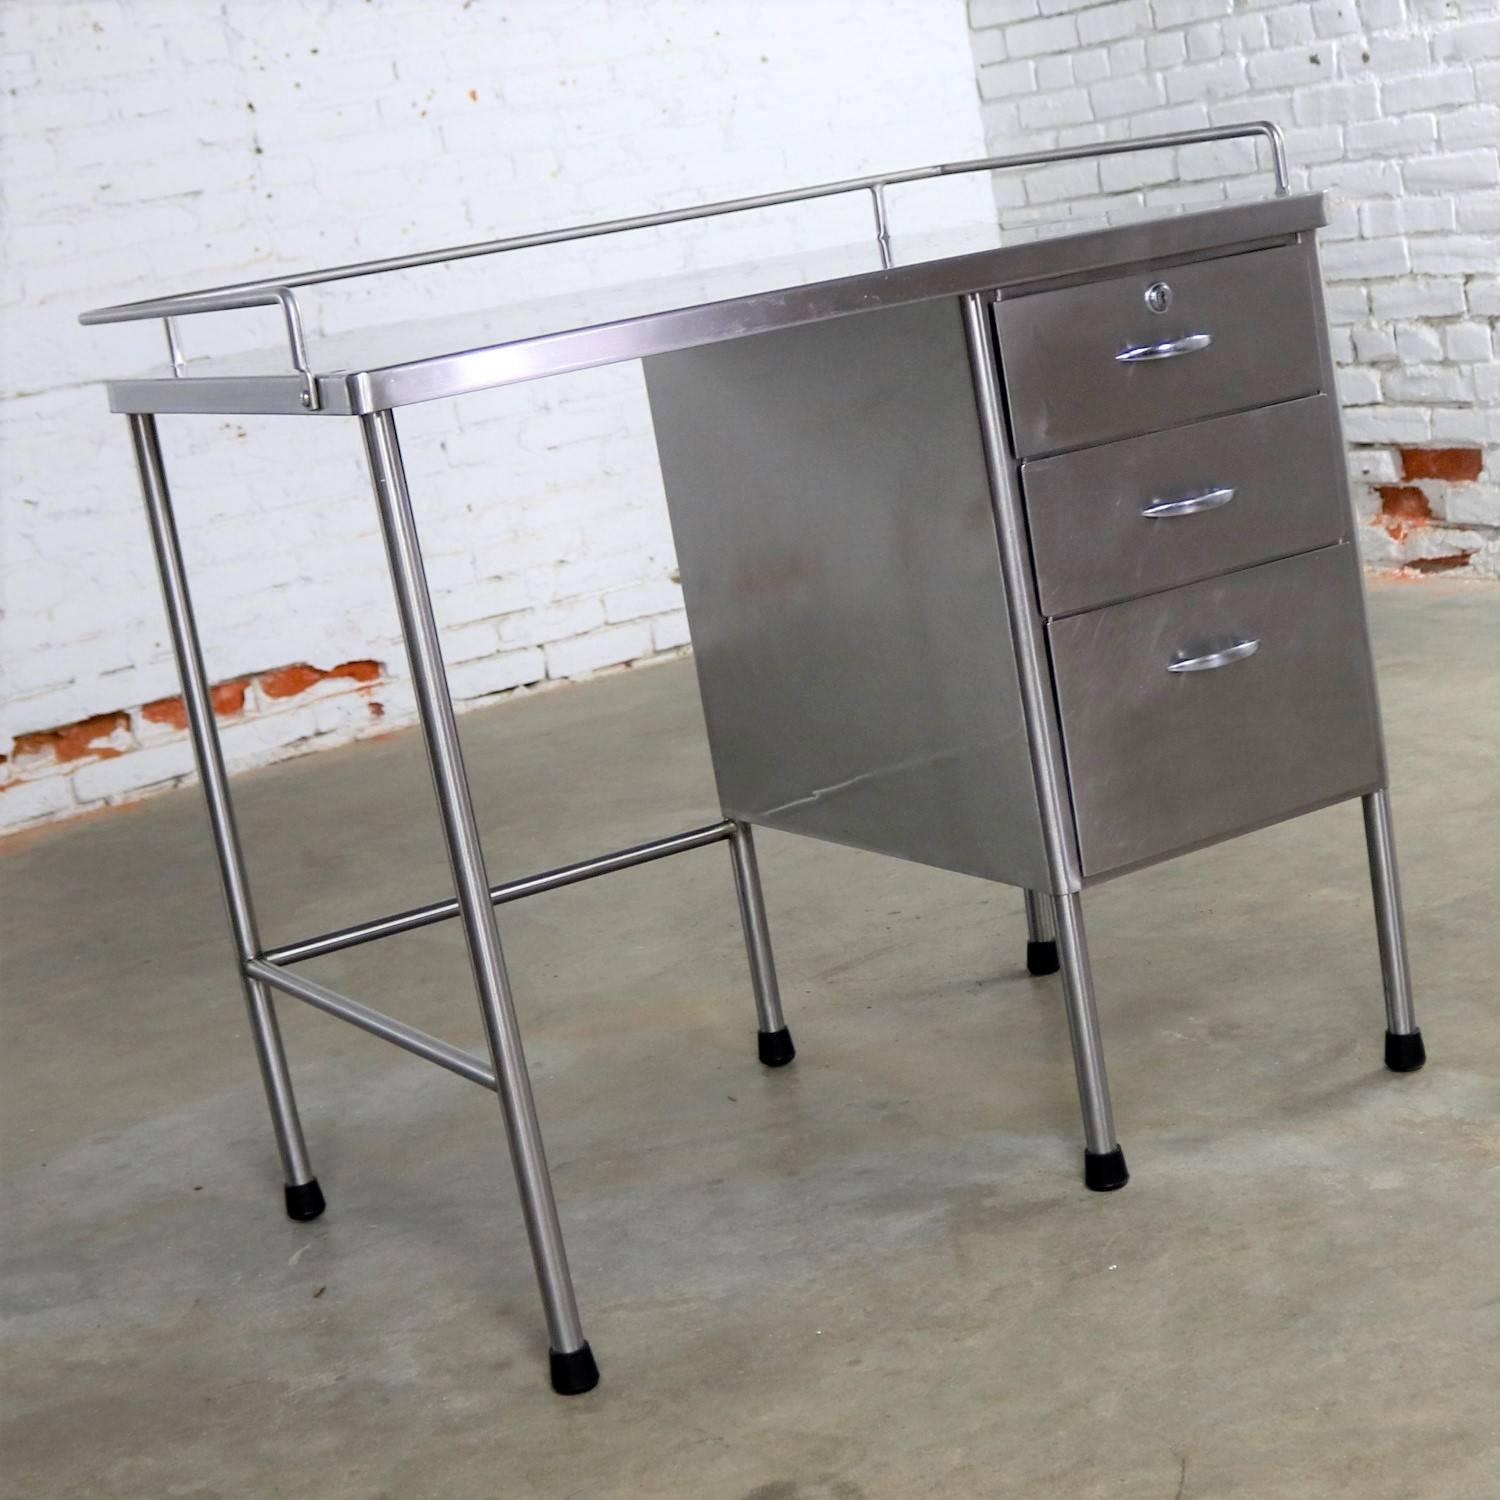 Handsome vintage stainless-steel writing desk. Former industrial or surgical medical desk. In fabulous vintage condition with scratches as you would expect from use, but which gives an overall interesting patina to the stainless steel, circa